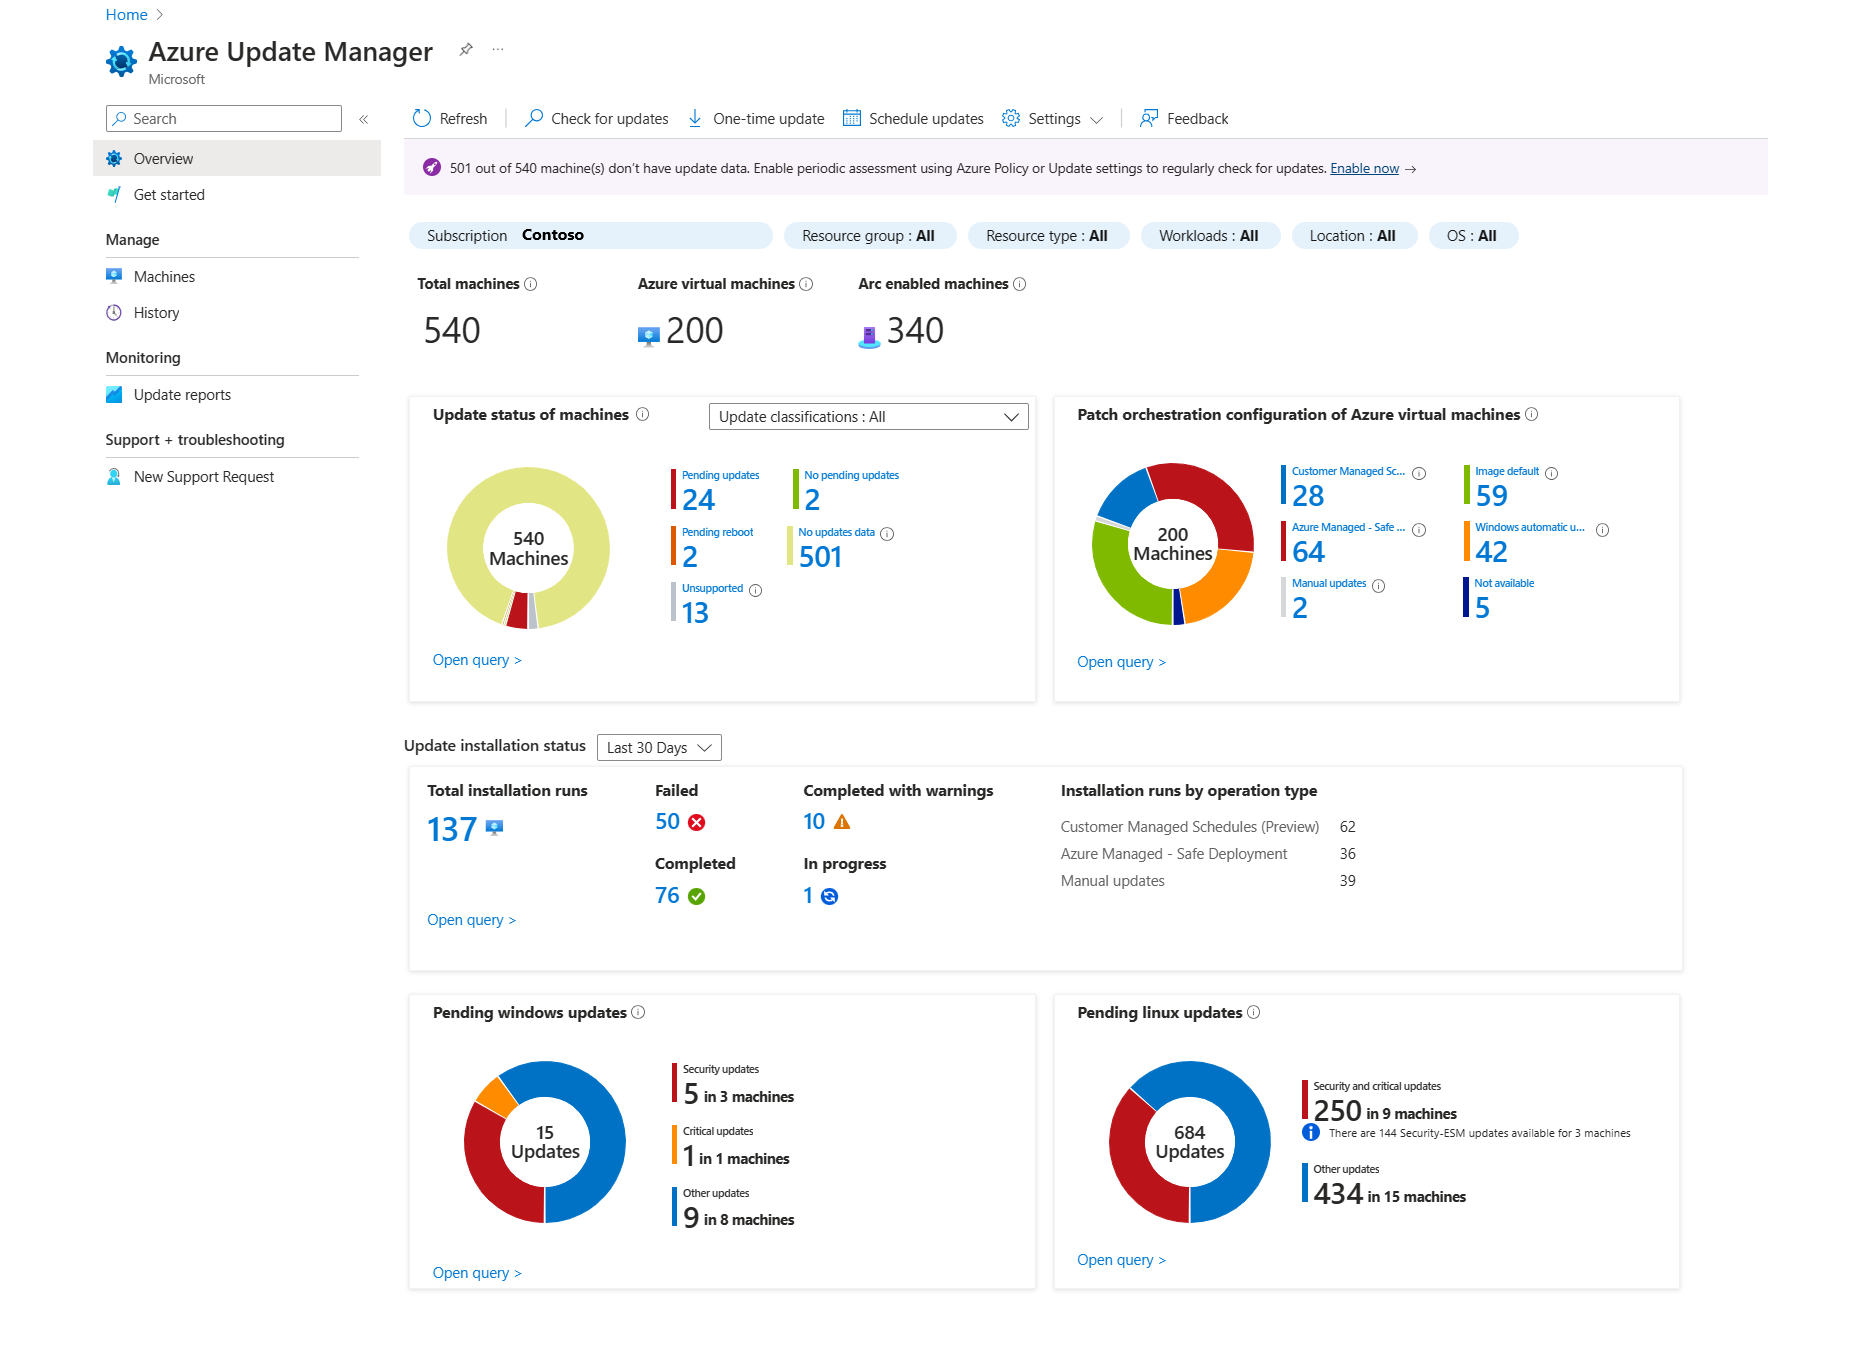 Screenshot of update management center overview page in the Azure portal.